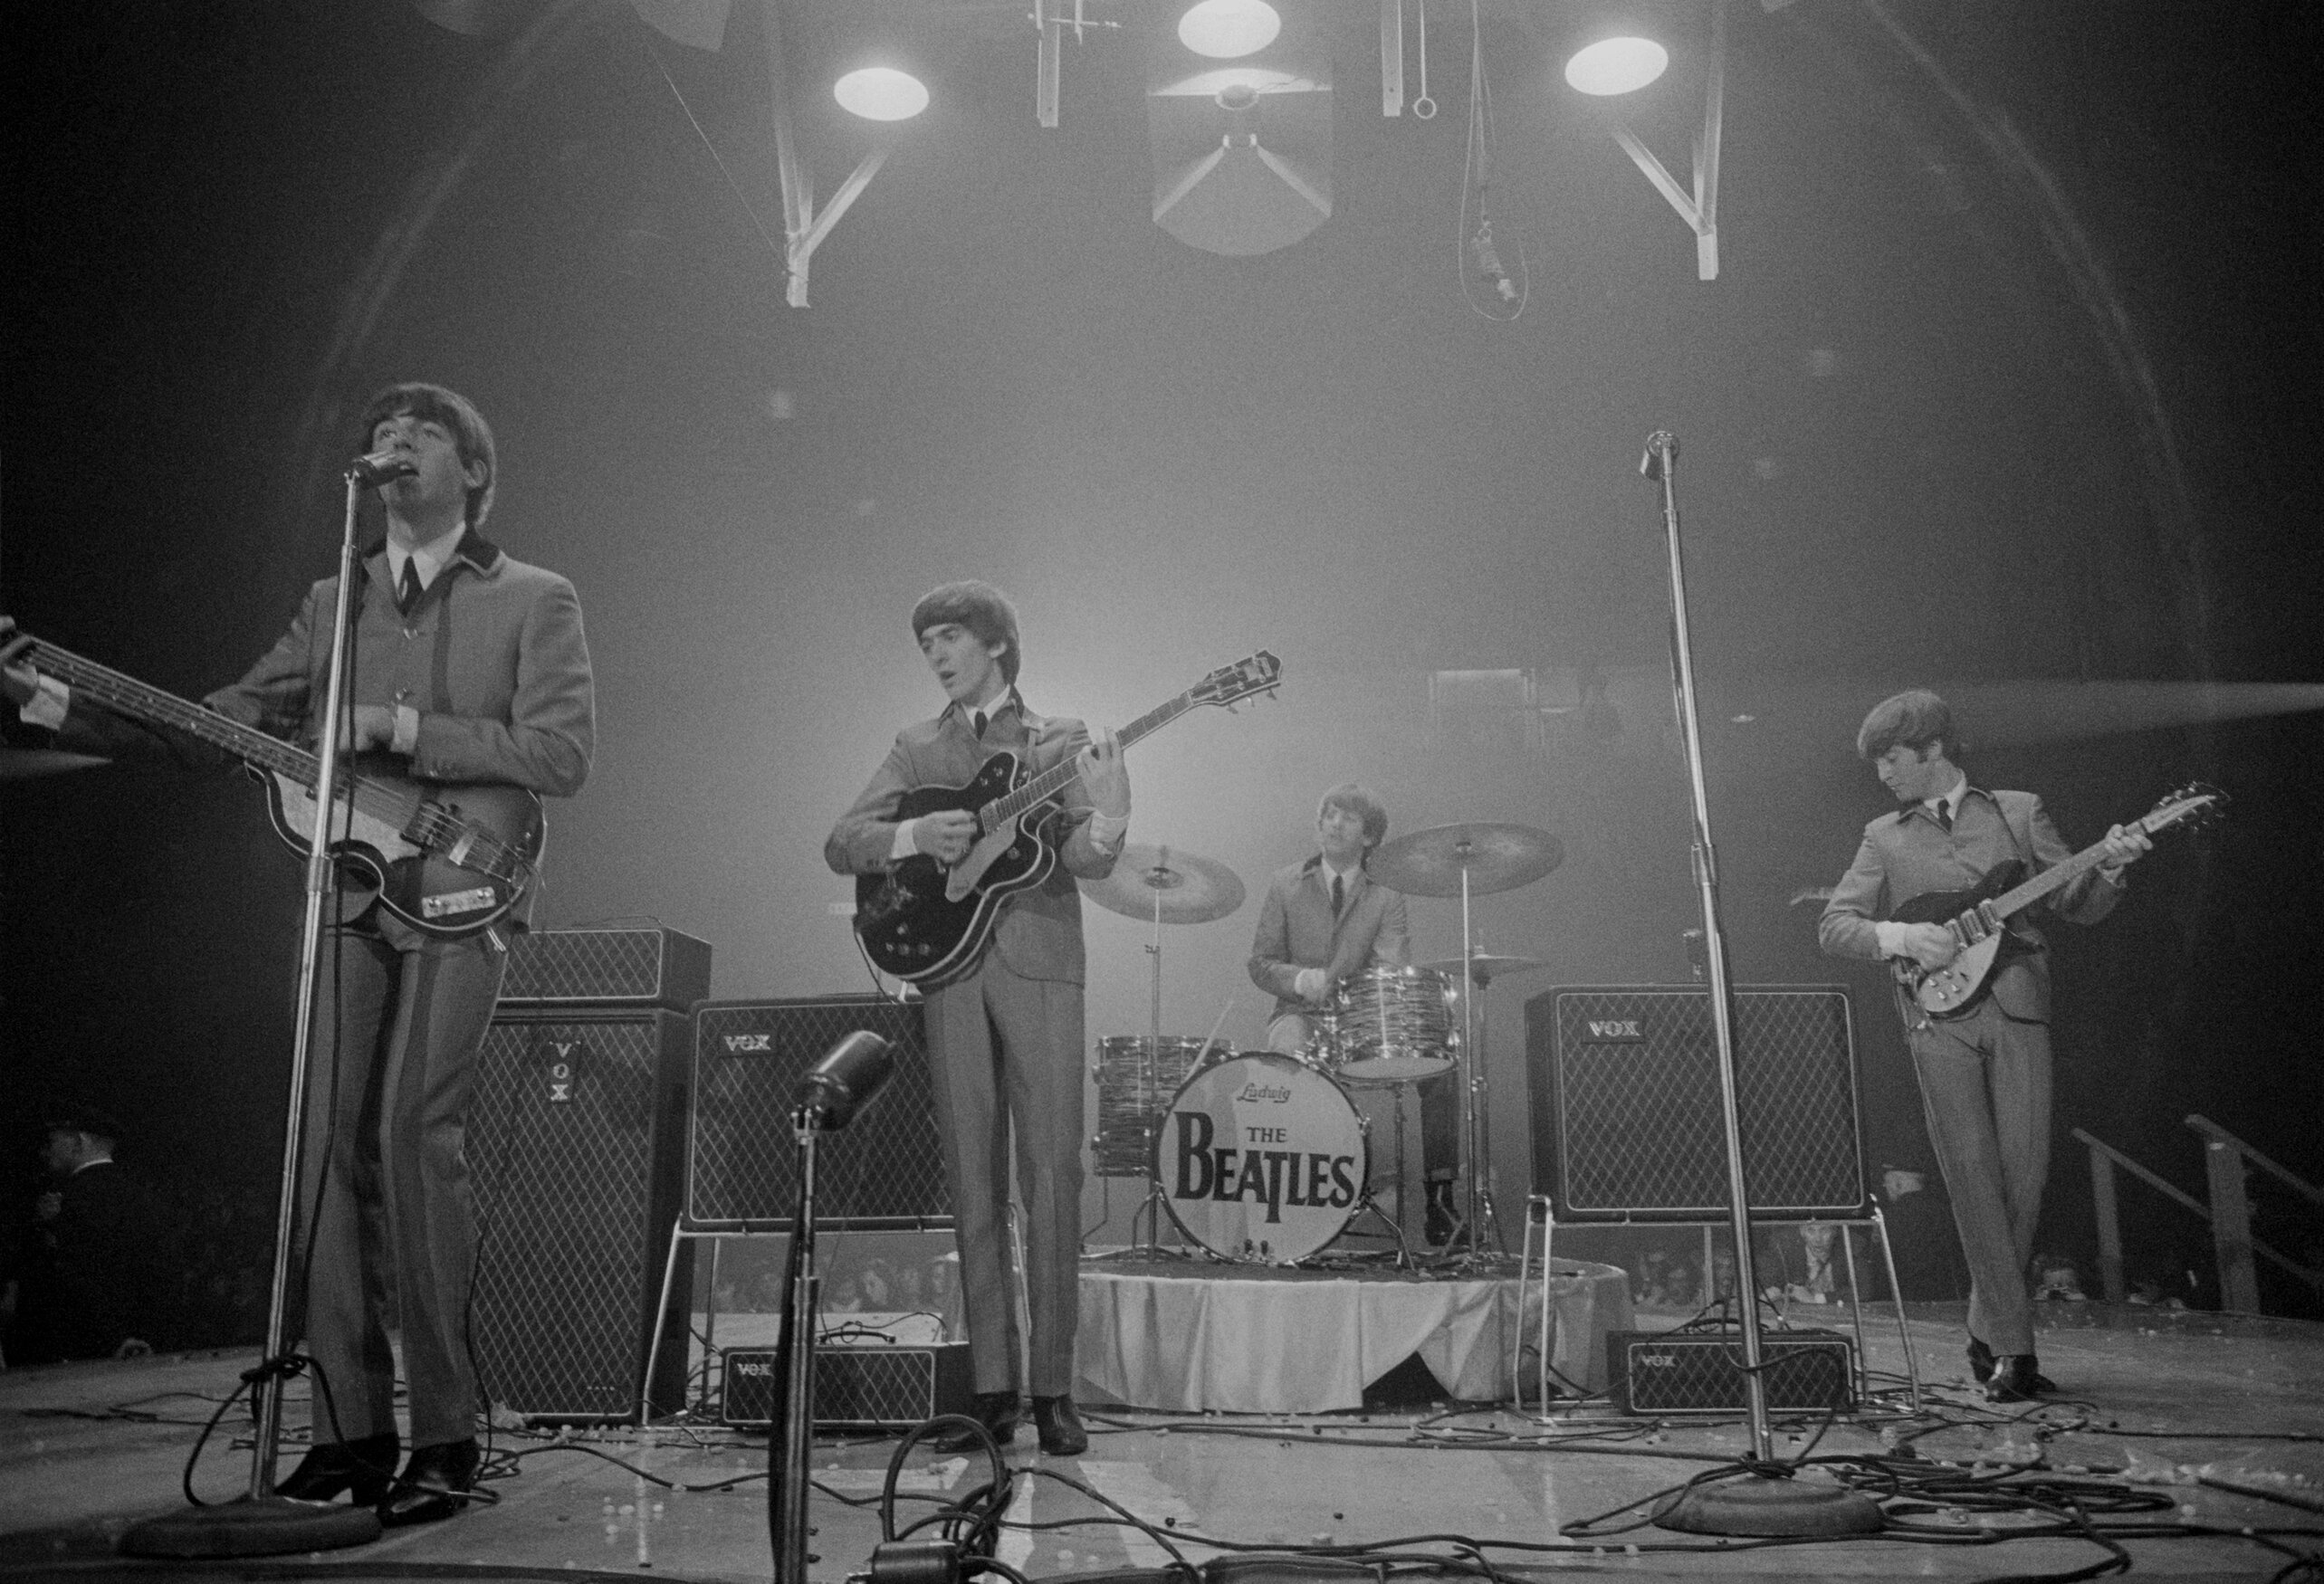 The Beatles perform on stage at the Washington Coliseum, Washington DC, February 11, 1964. The performance was their first US concert, coming two days after their first appearance on 'The Ed Sullivan Show.' Pictured are, from left, Paul McCartney, George Harrison, Ringo Starr, and John Lennon.